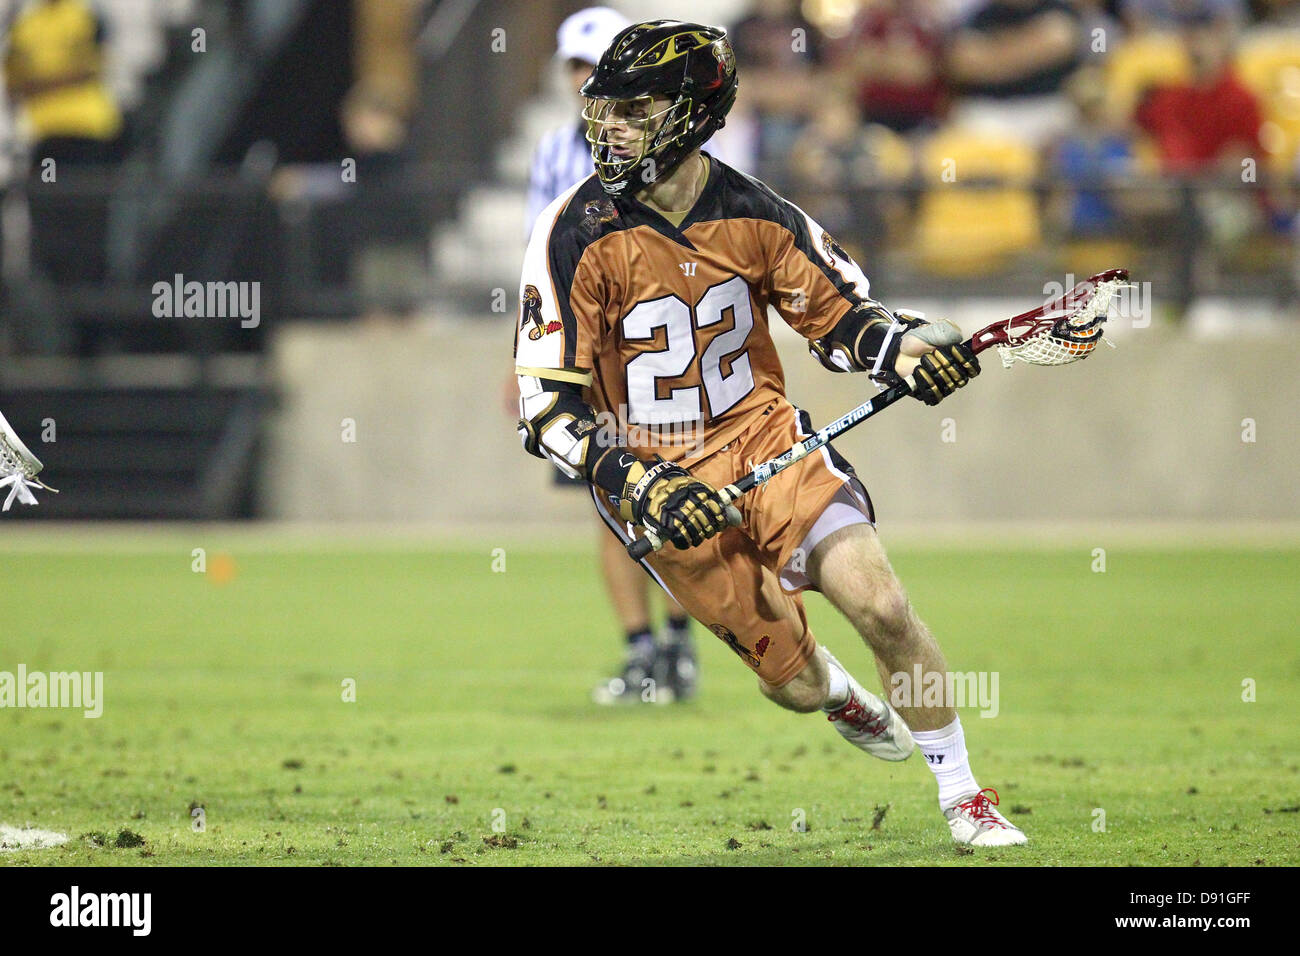 June 7, 2013: Rochester's Ned Crotty (22) in action during the MLL game between the Rochester Rattlers and the Boston Cannons, played at Kennesaw State's 5/3 Bank Stadium in Kennesaw, Georgia. Rochester scored the last 3 goals of the game to defeat Boston, 16-14, in the MLL's debut in the state of Georgia. Stock Photo